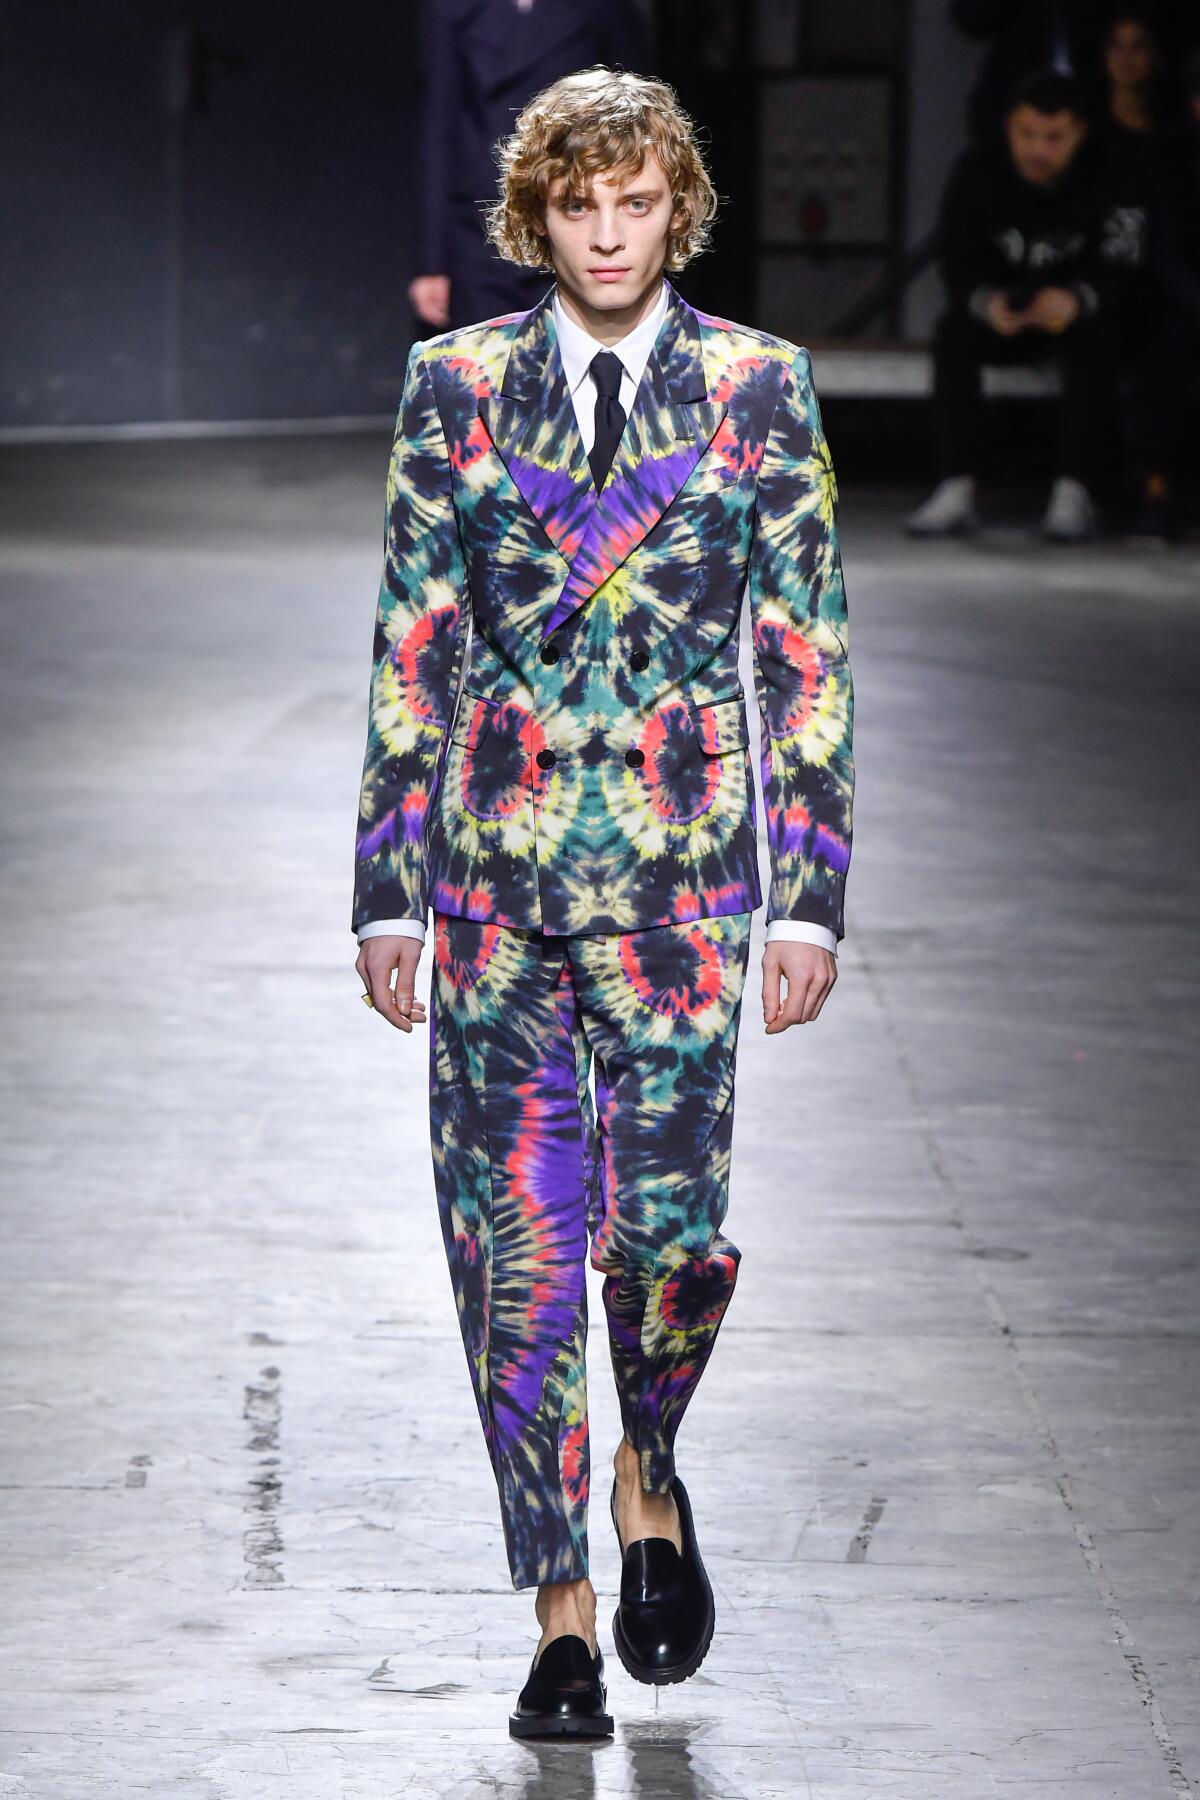 Color reigned on the Paris runways in January when Dries Van Noten showed a terrific fall collection of classic tailoring emblazoned with tie-dye prints.